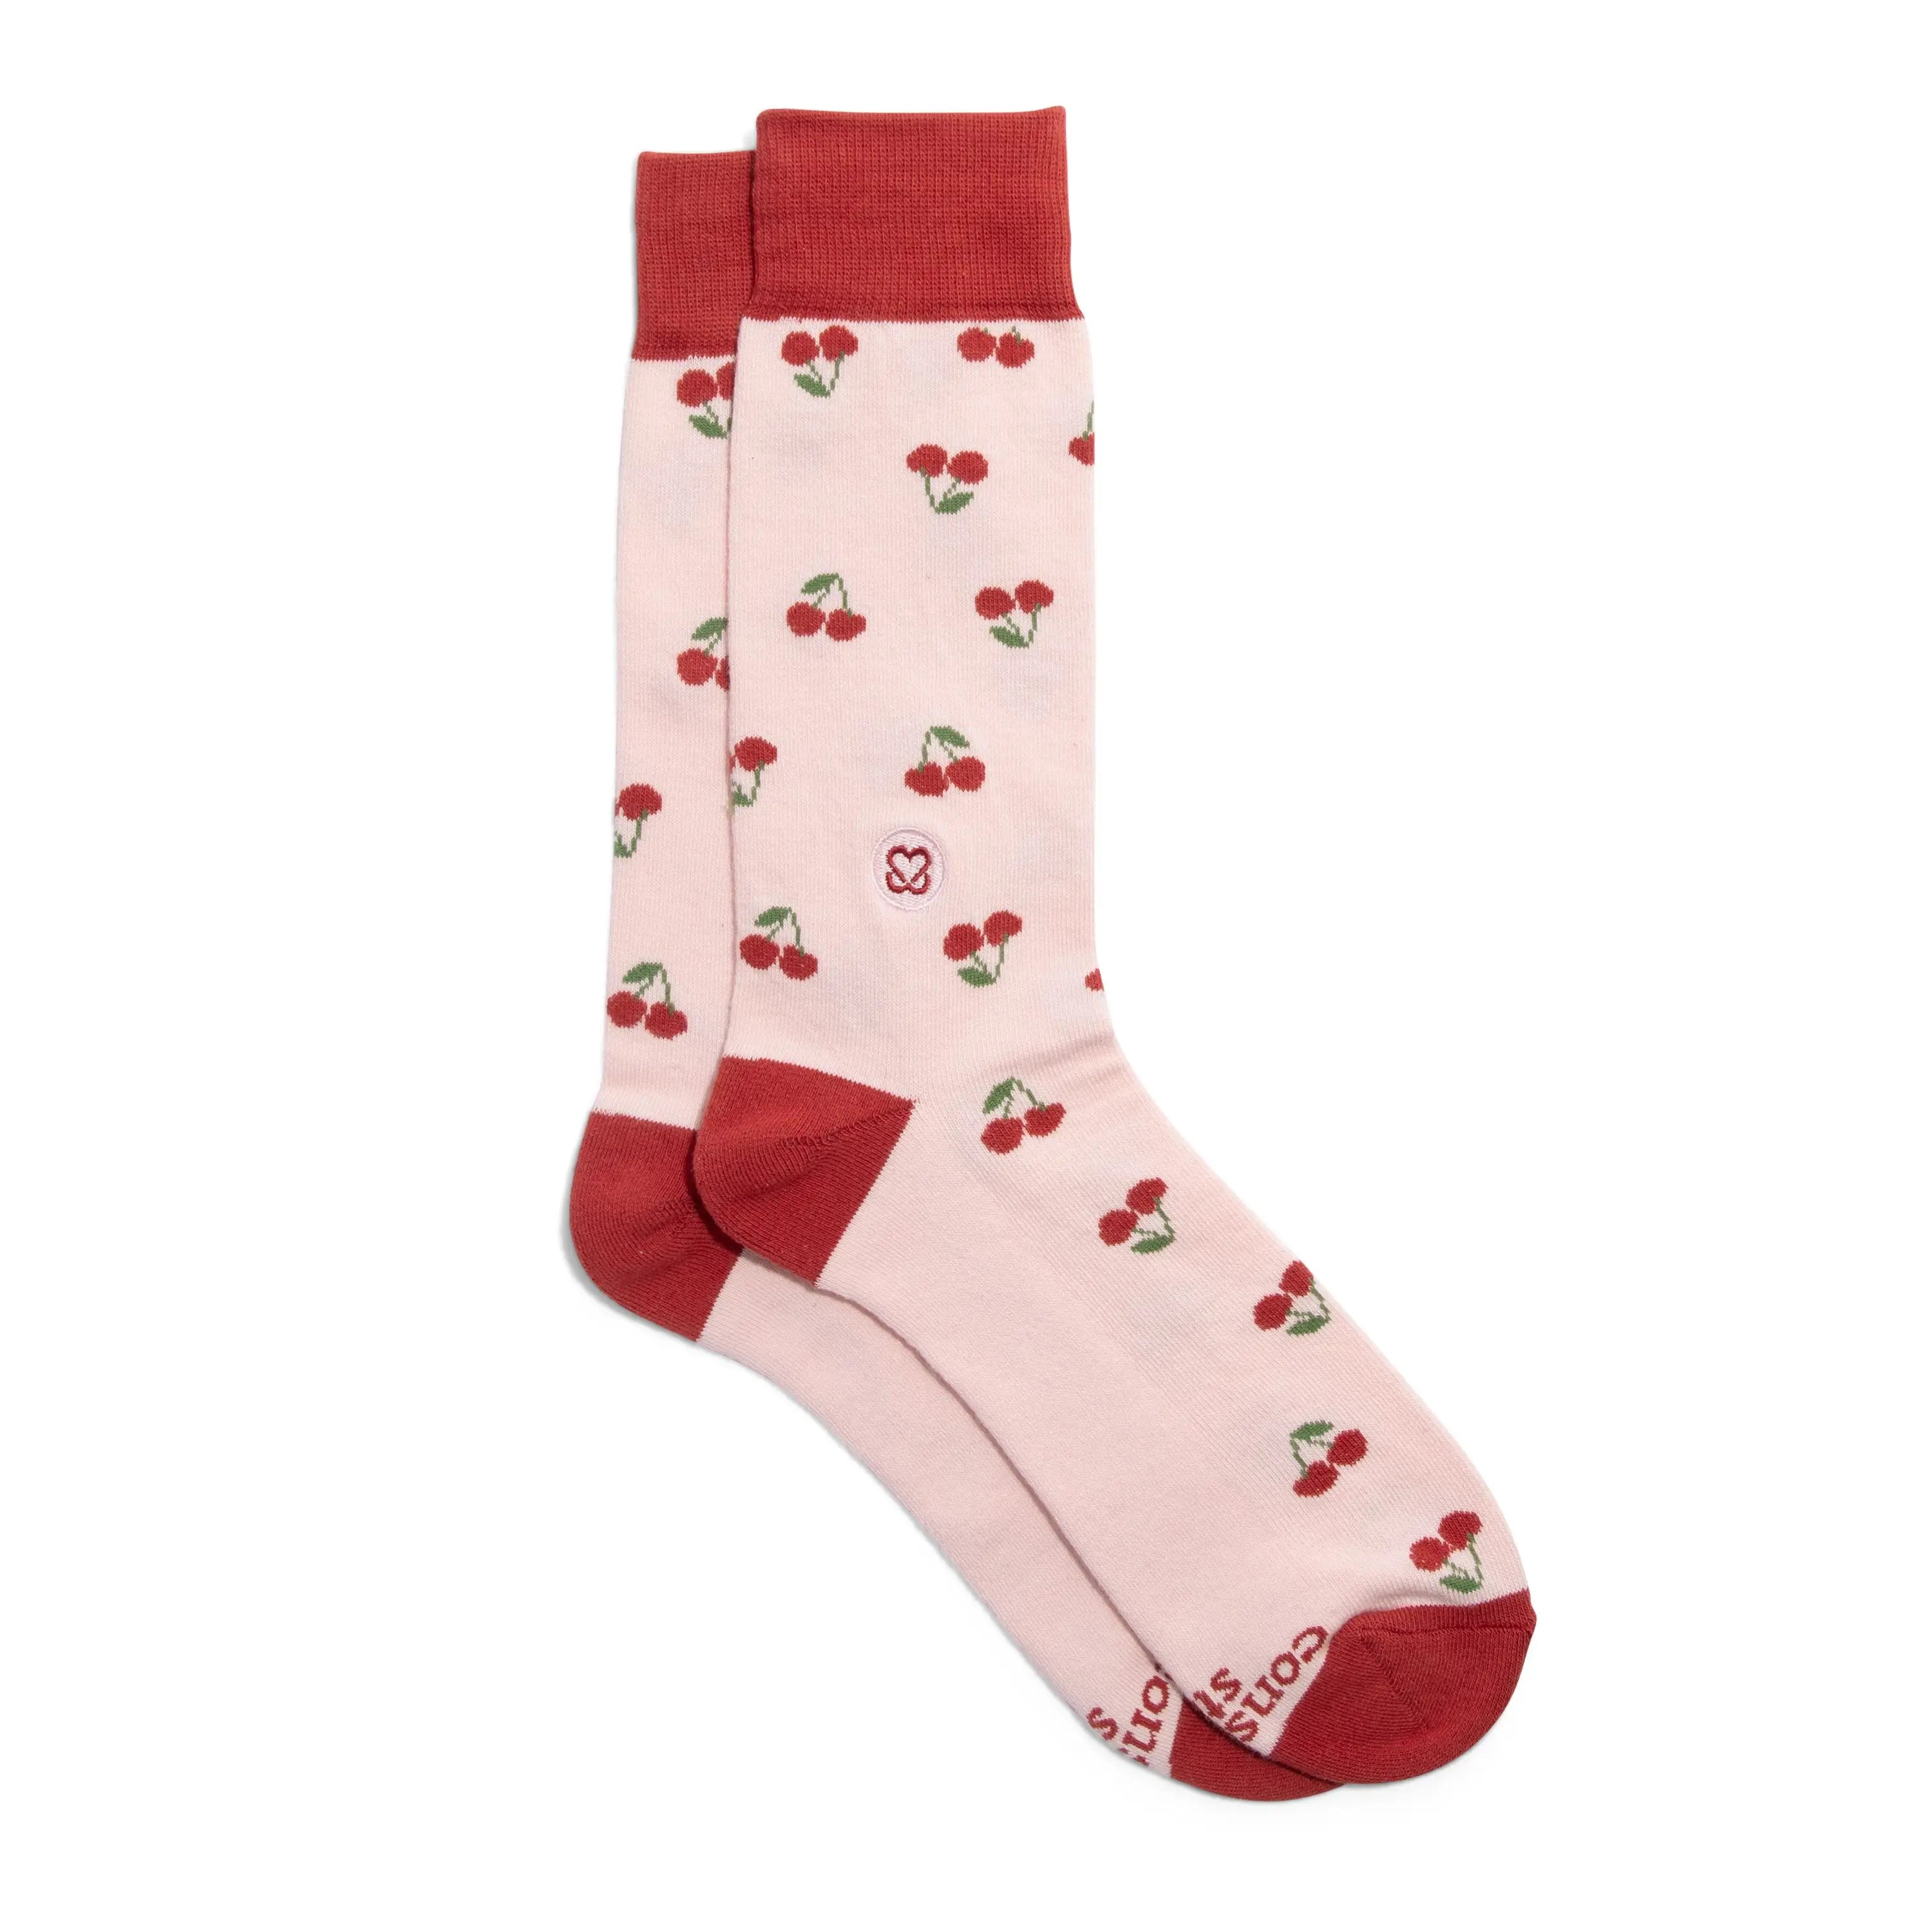 socks that support self-checks (cherries) by conscious step | S